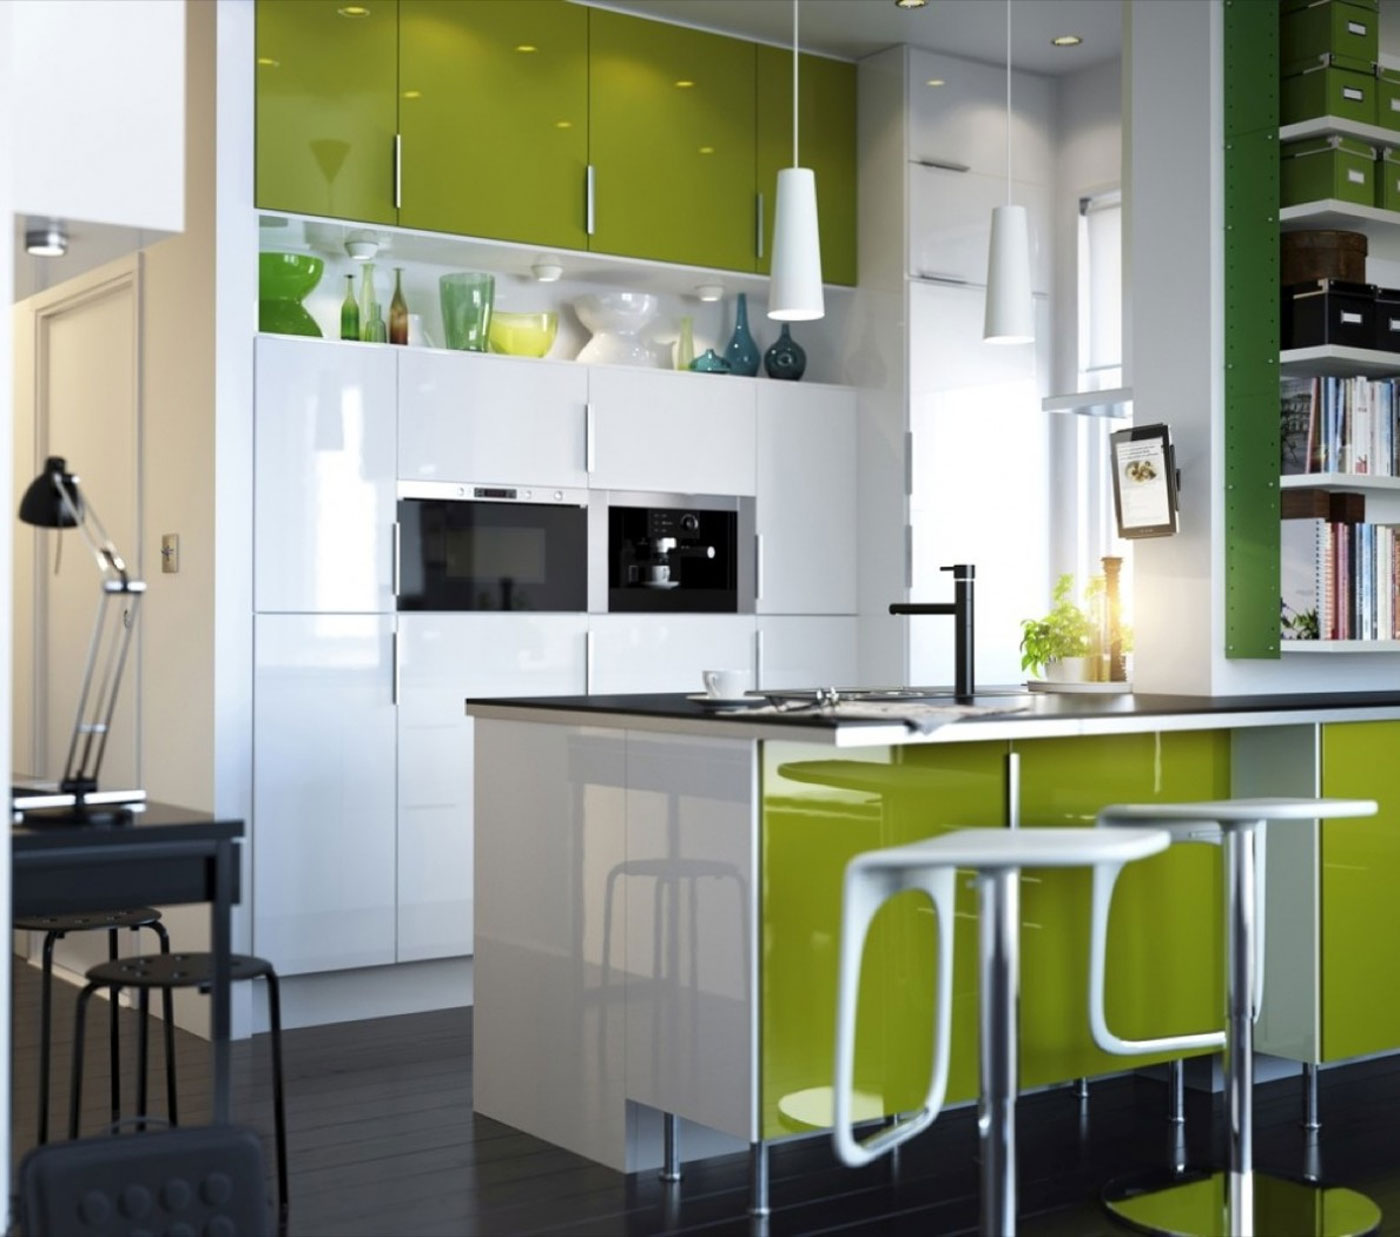 Small Kitchen Eating Green Small Kitchen Design With Eating Area Ideas Also Modern Kitchen Sinks Stainless Steel Double Bowl Together With Gorgeous White Pendant Lamps IKEA Small Kitchen Design Kitchen The Balance Between The Small Kitchen Design And Decoration